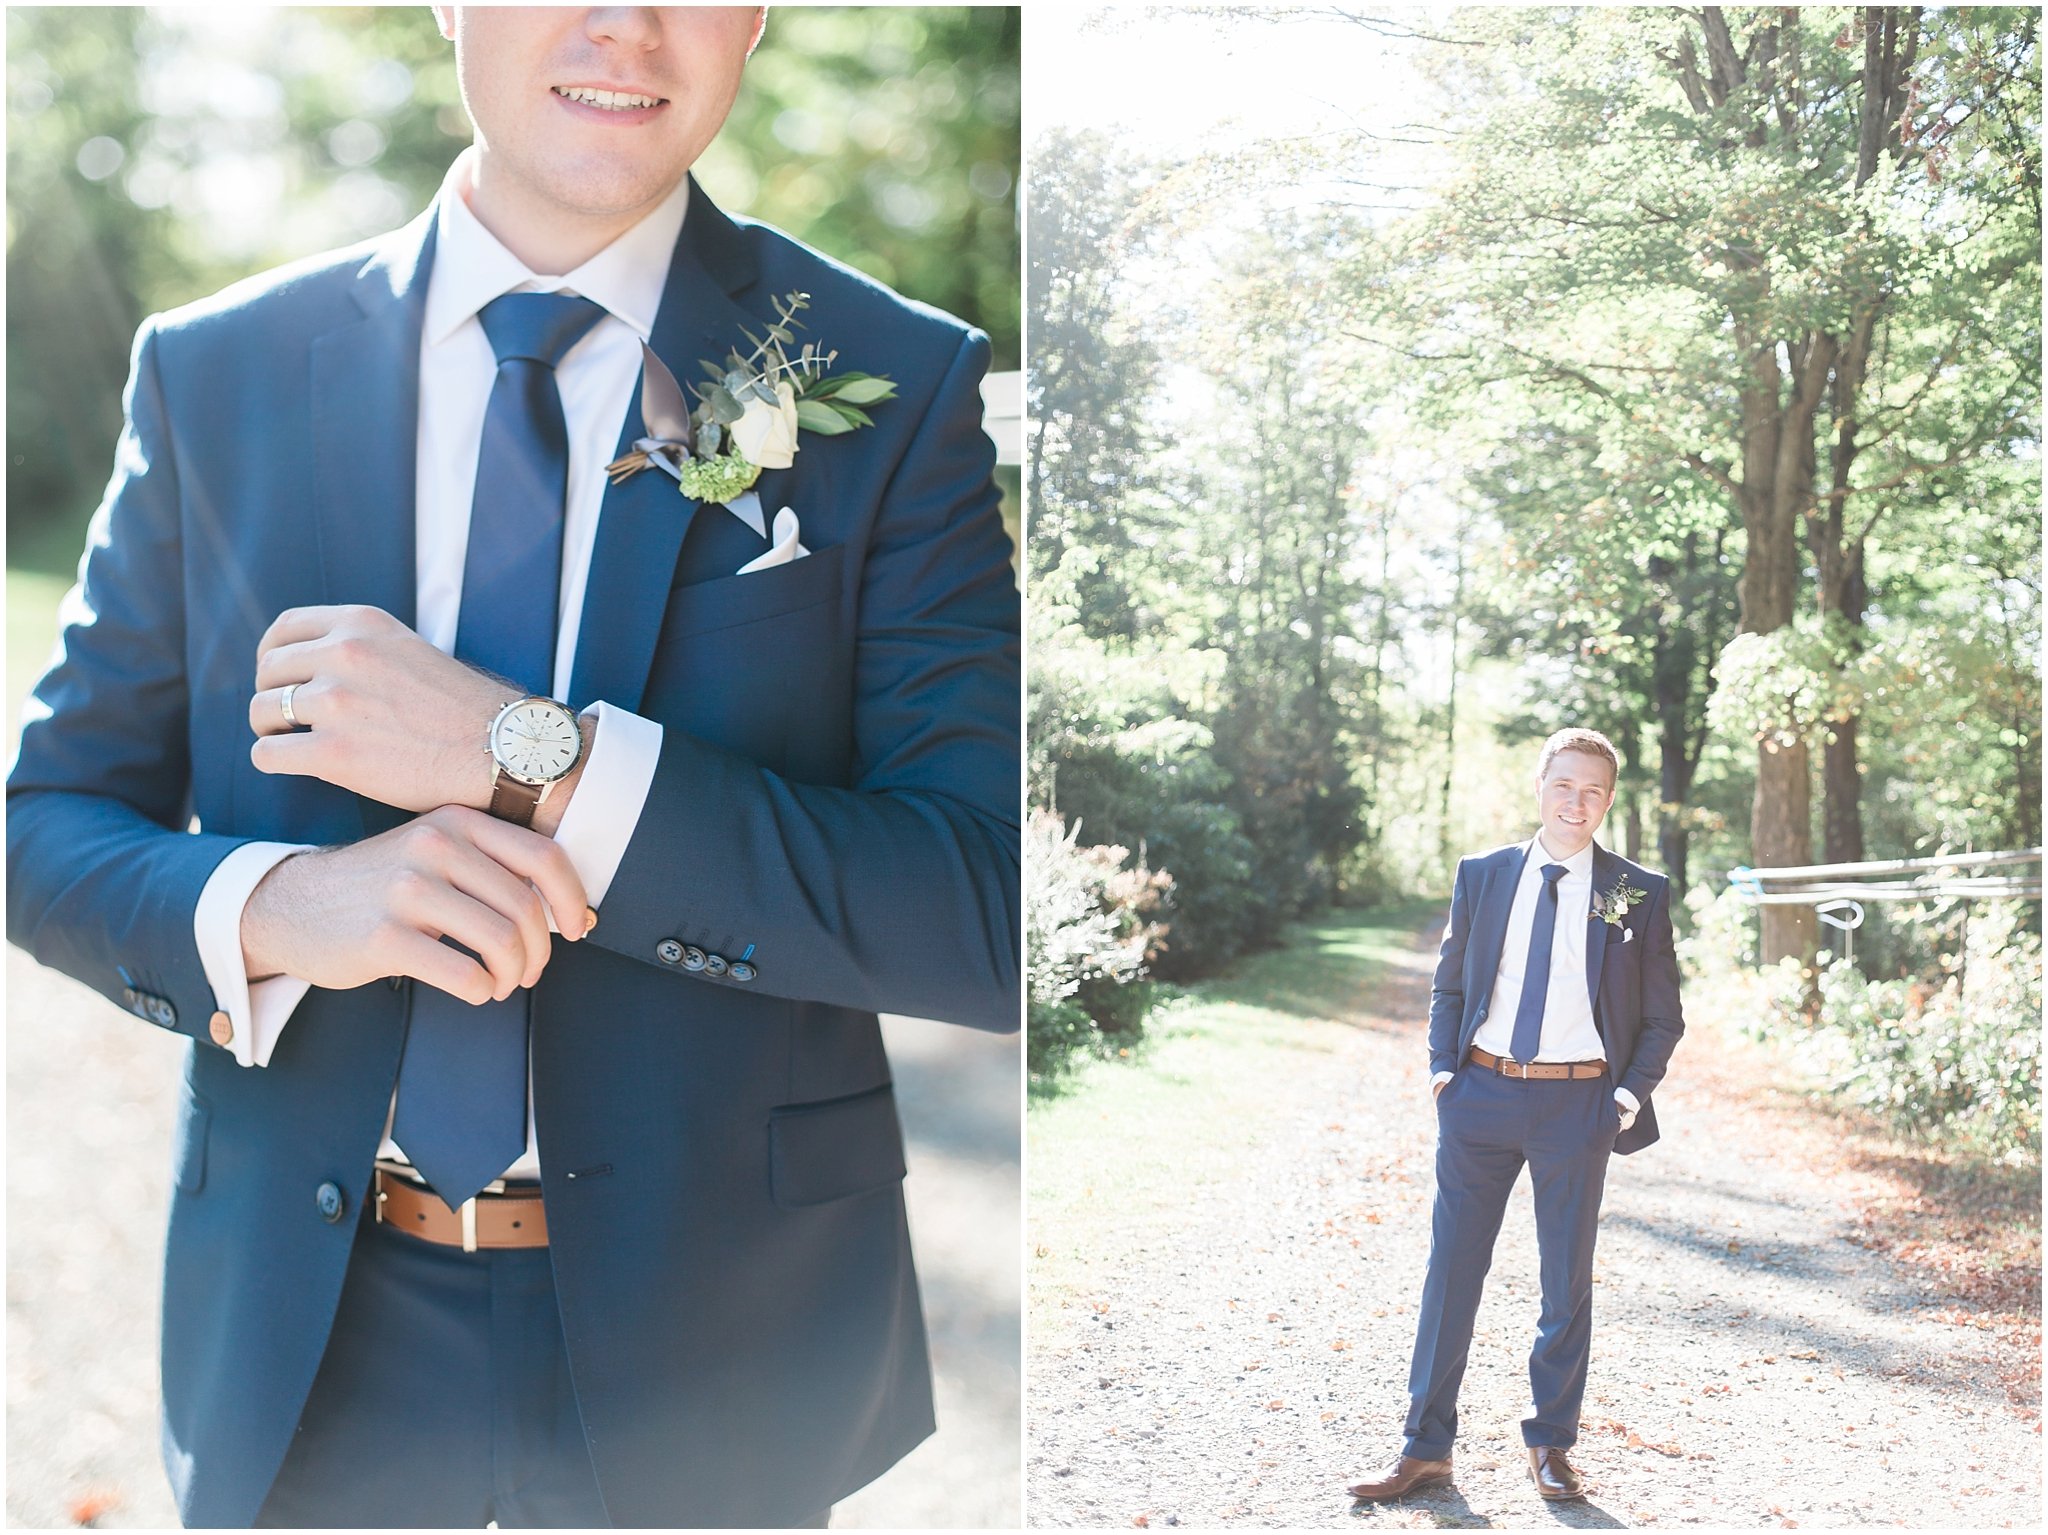 Ottawa groom at temples sugar bush wedding venue in a jimmy the suit guy suit